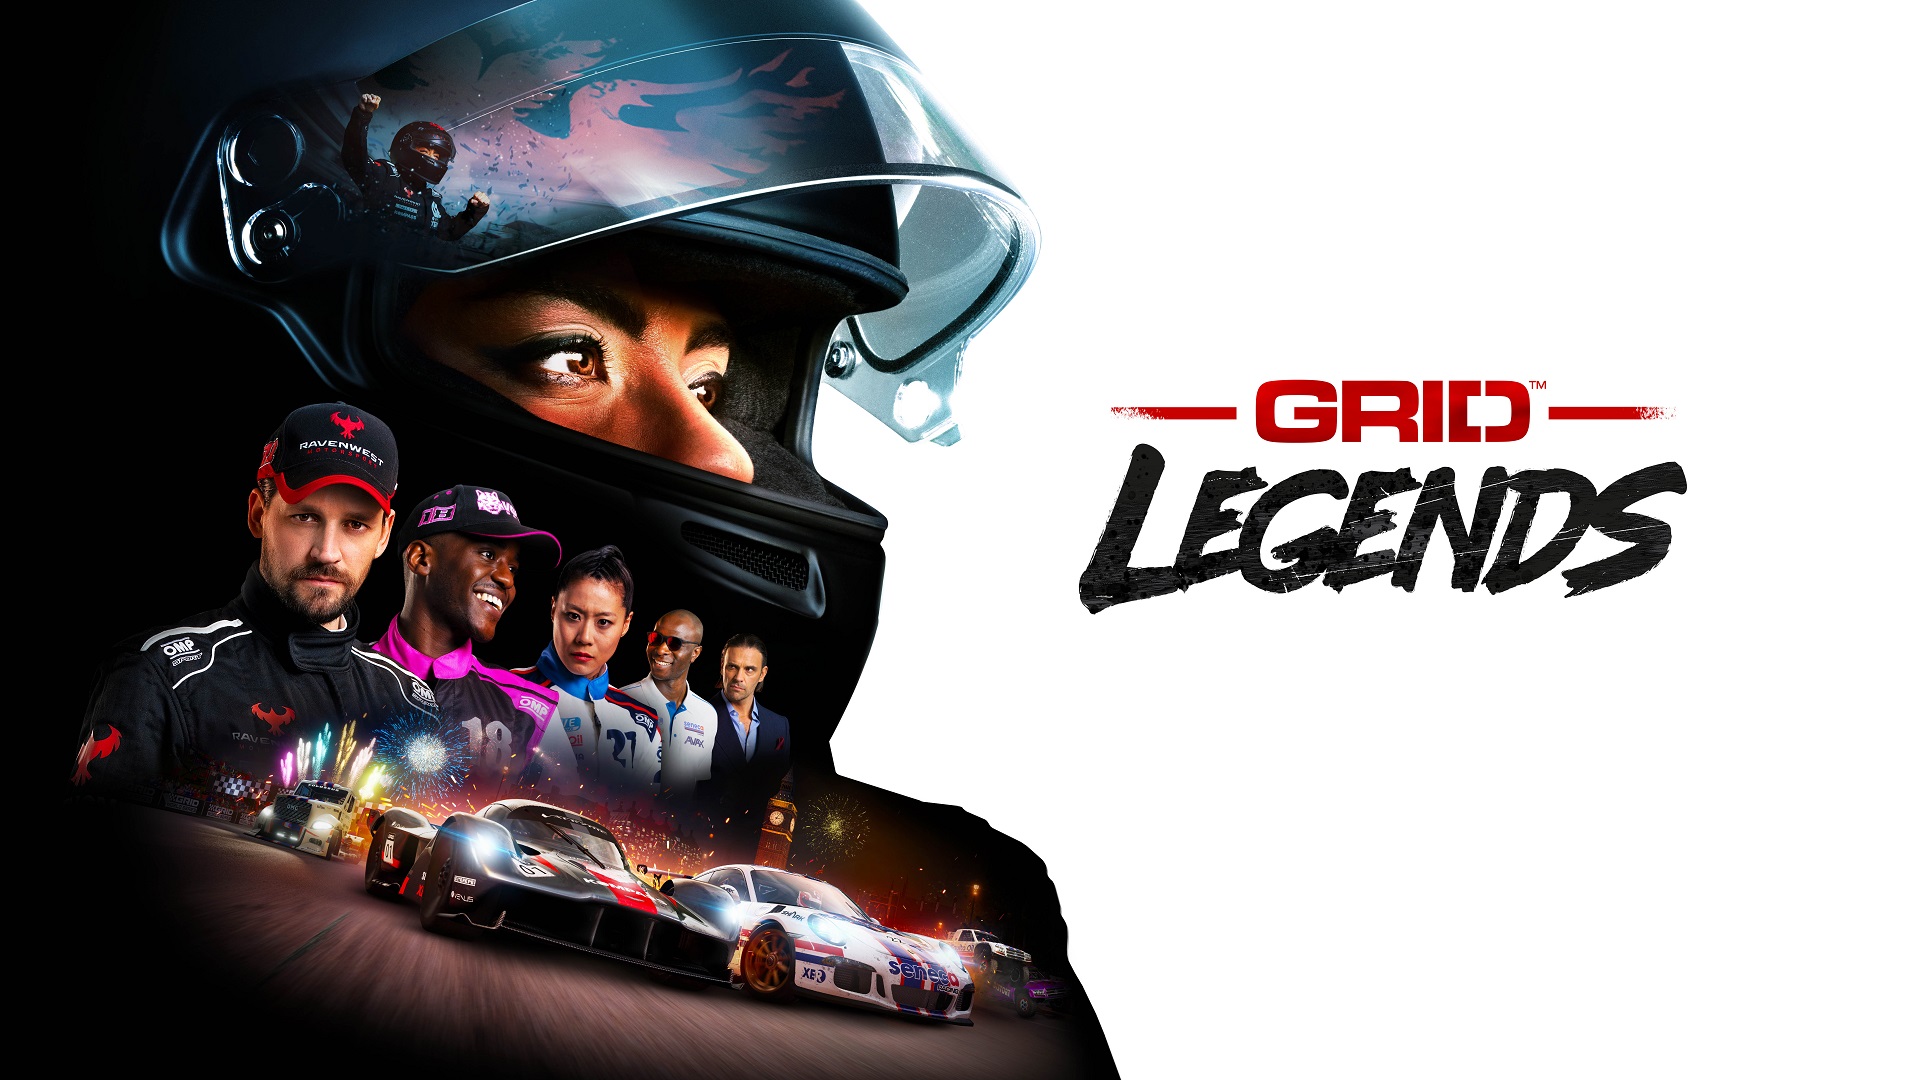 GRID Legends Announced for PC and Consoles